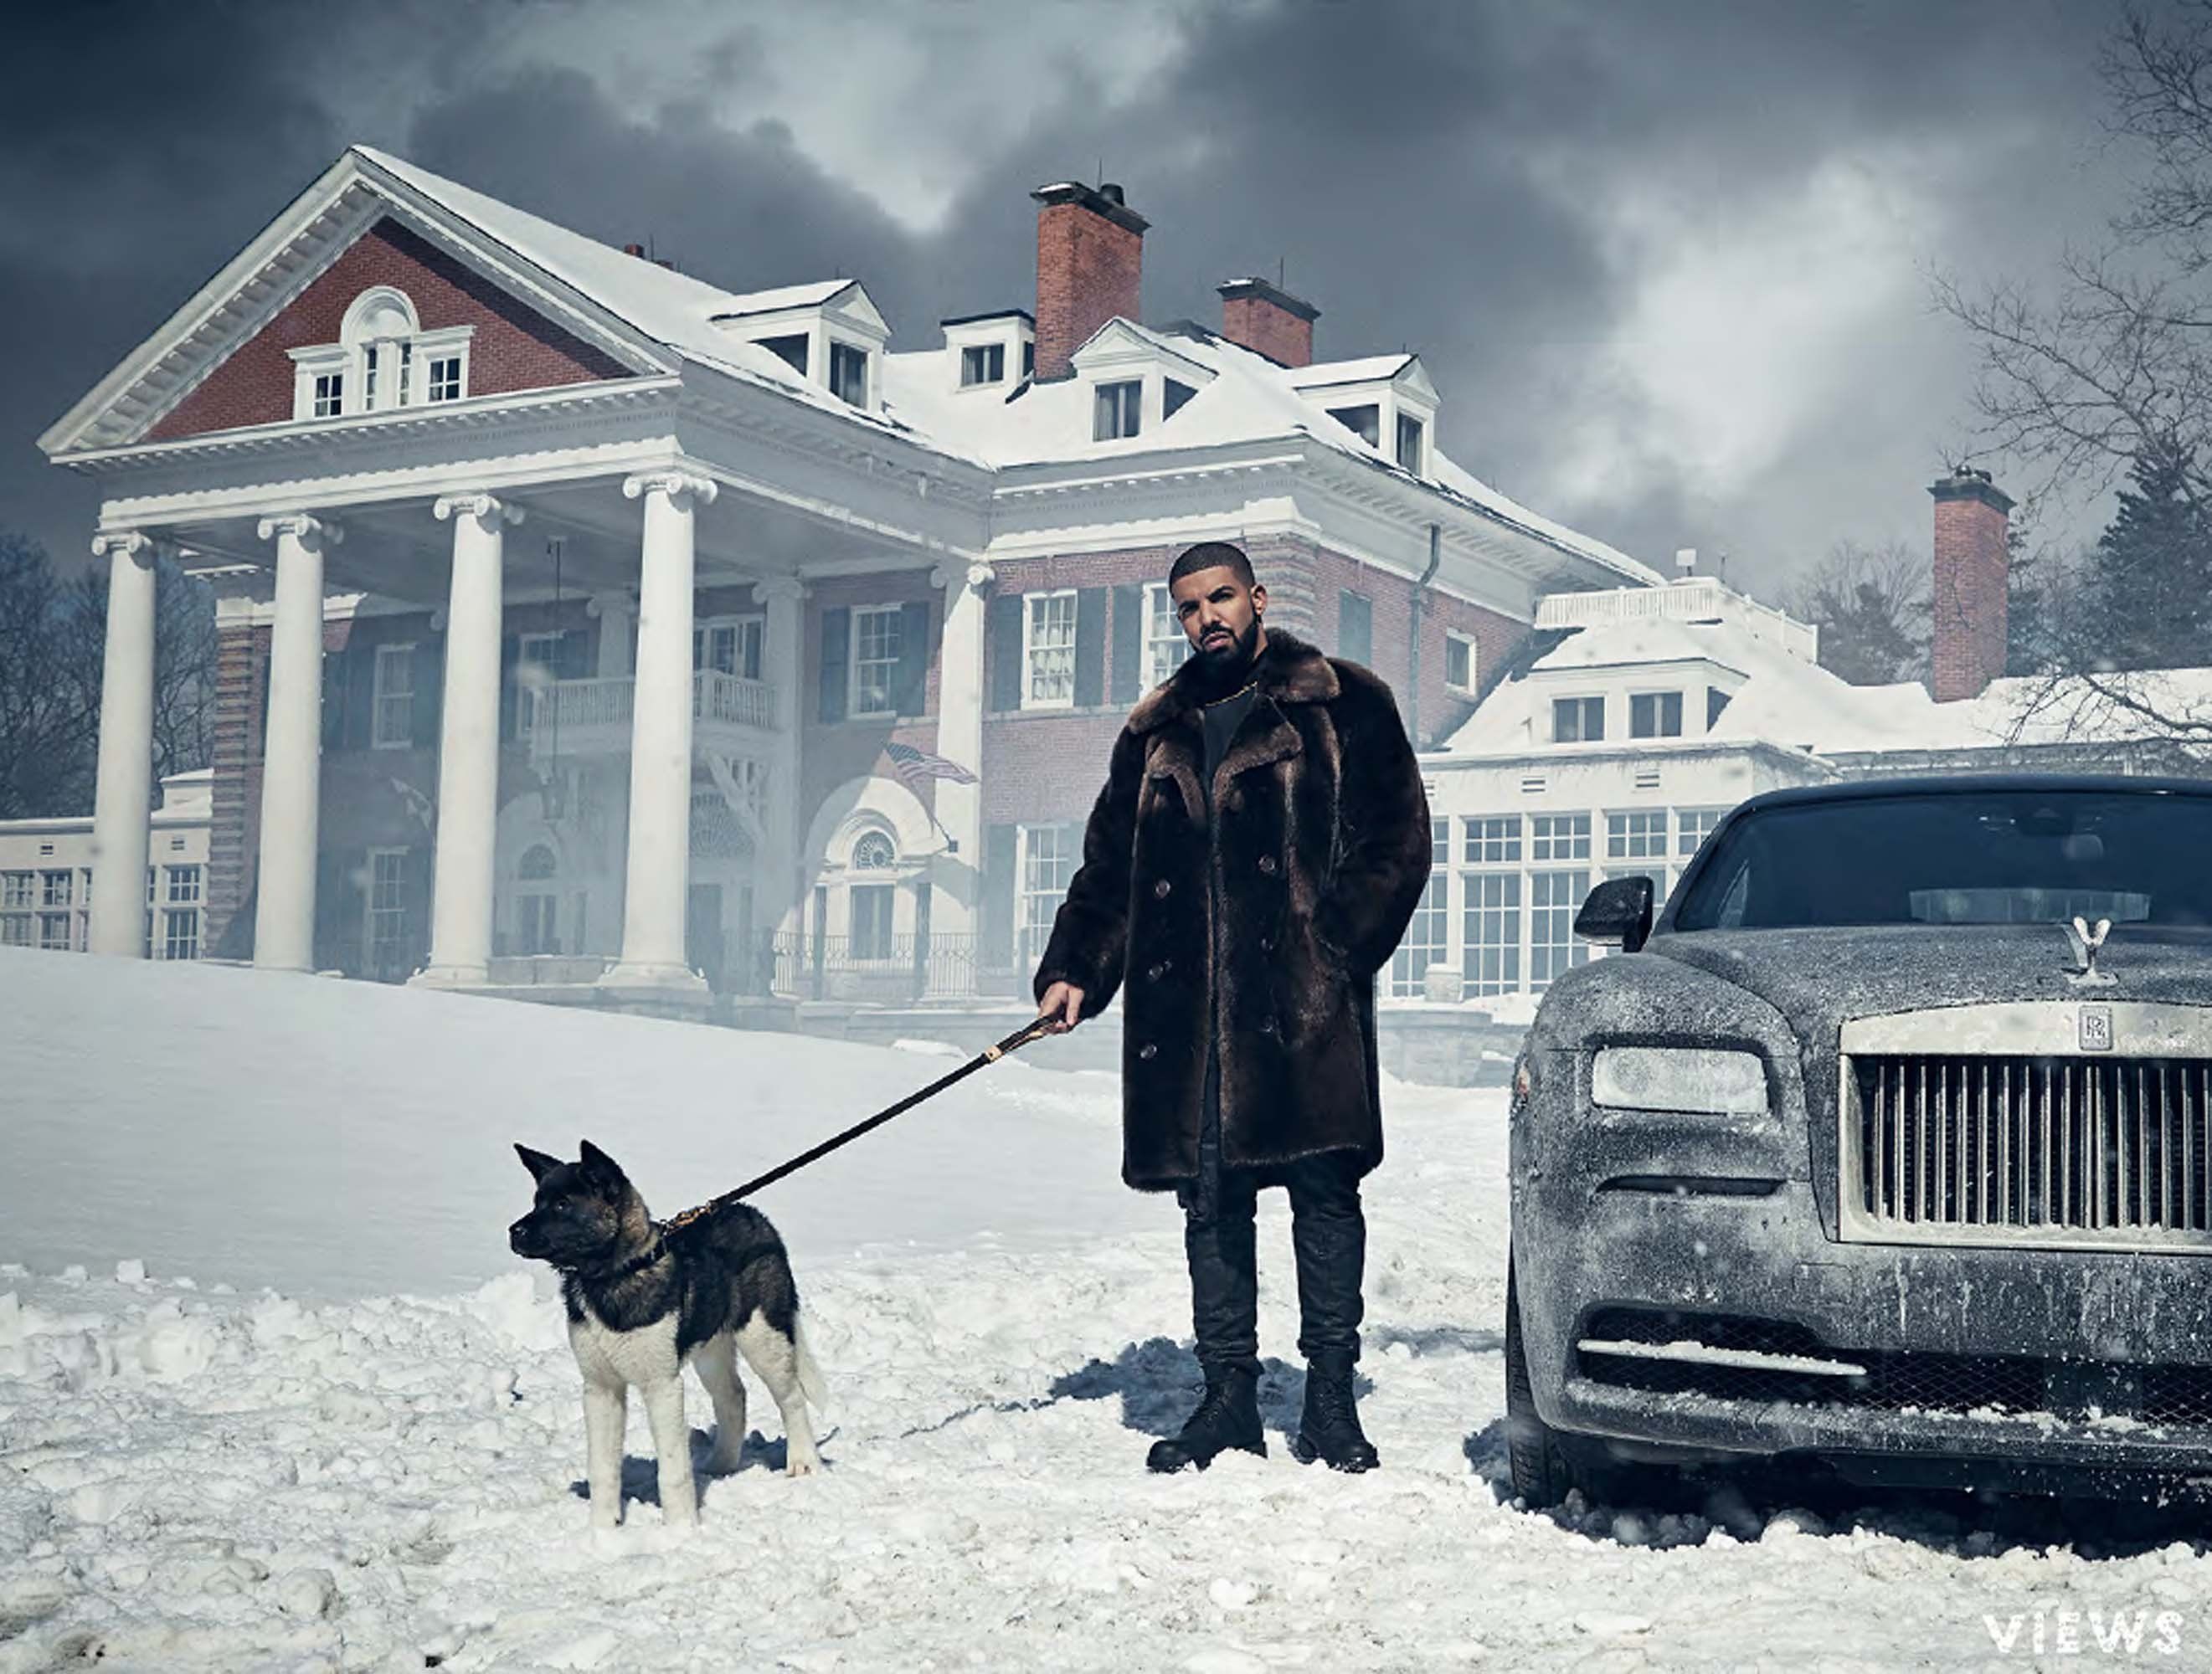 Drake's New Album Art: All the Views, All the Looks.